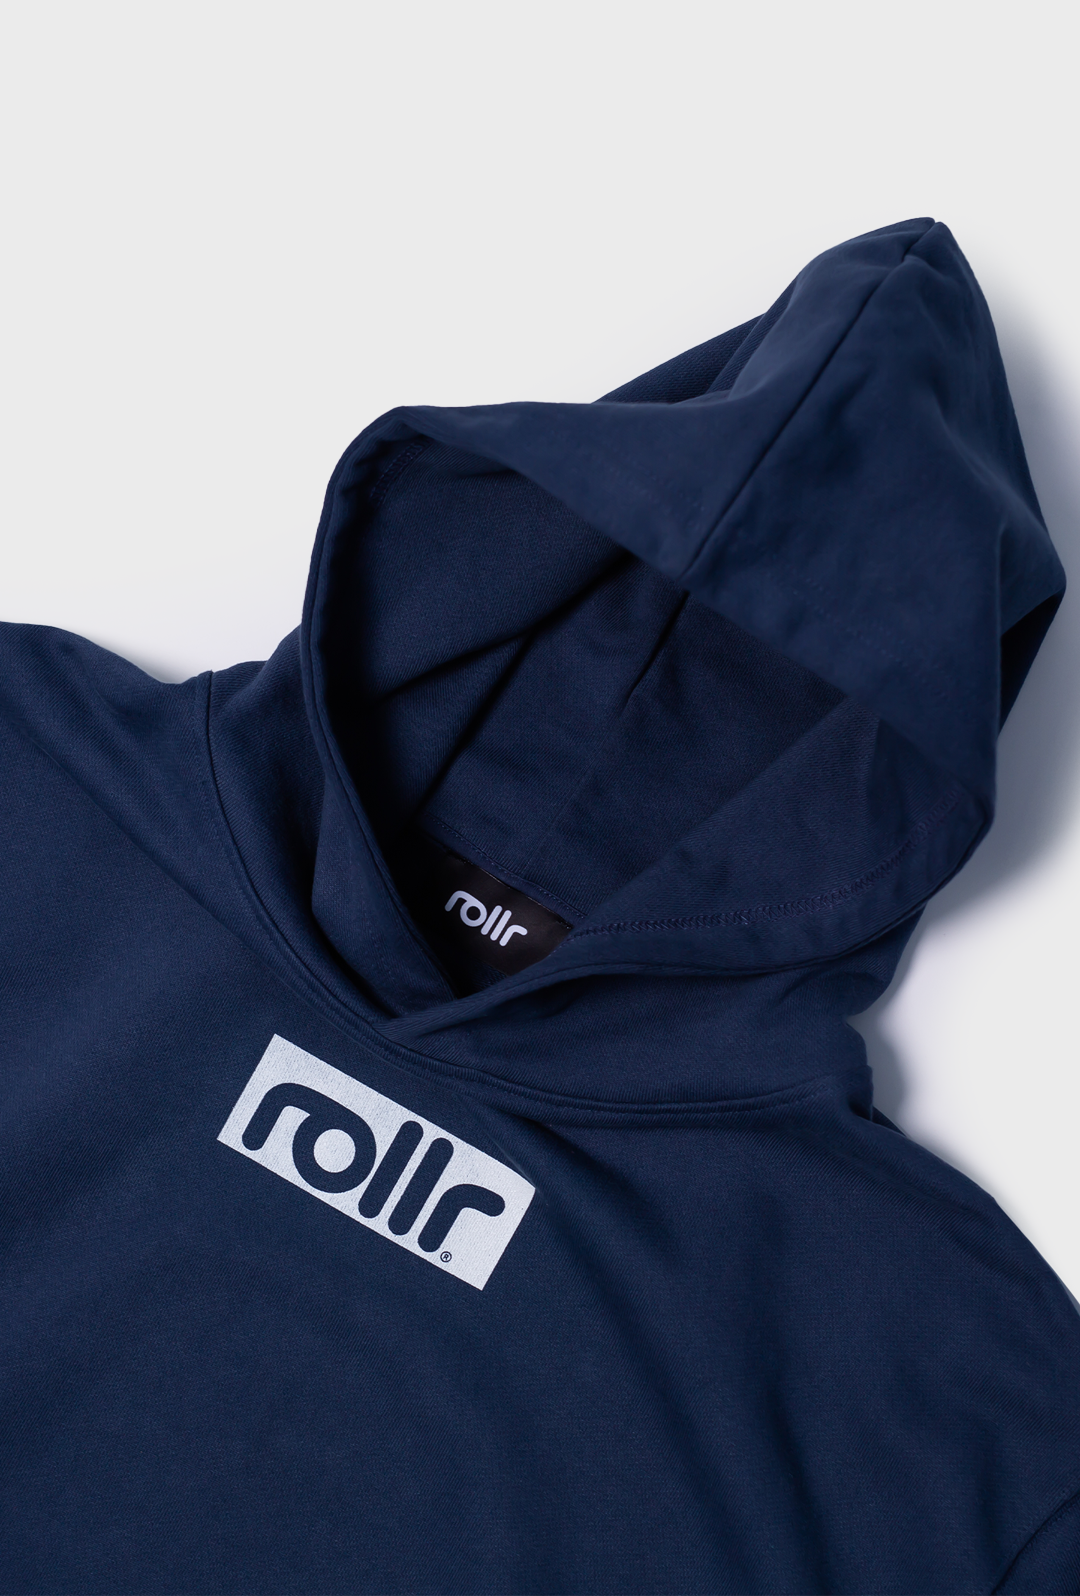 roller oversized dusk blue hoodie made organic cotton with rollr logo print and black rollr label